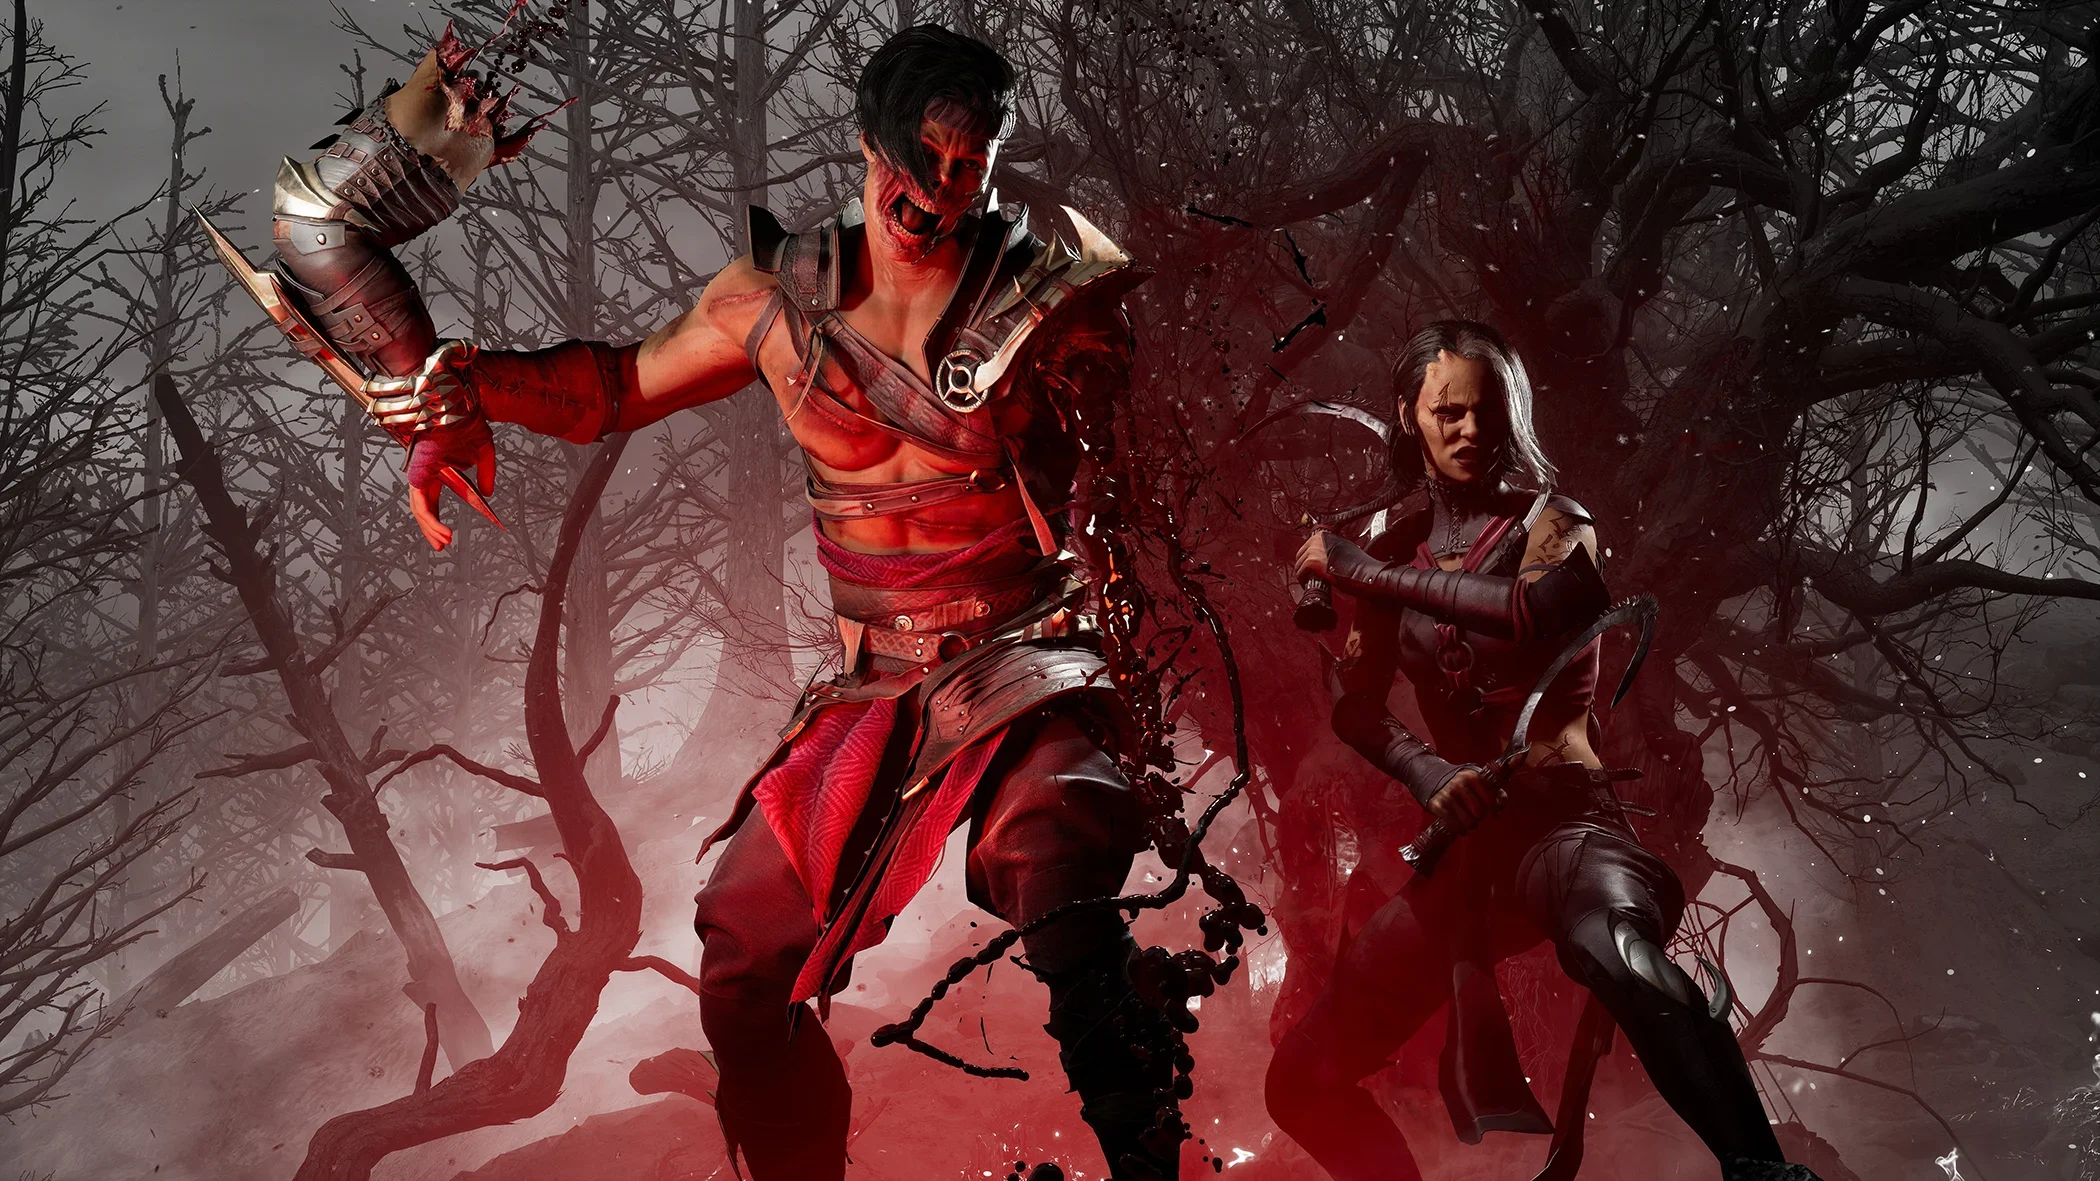 A complete set of fatalities from Mortal Kombat 1 collected in one video